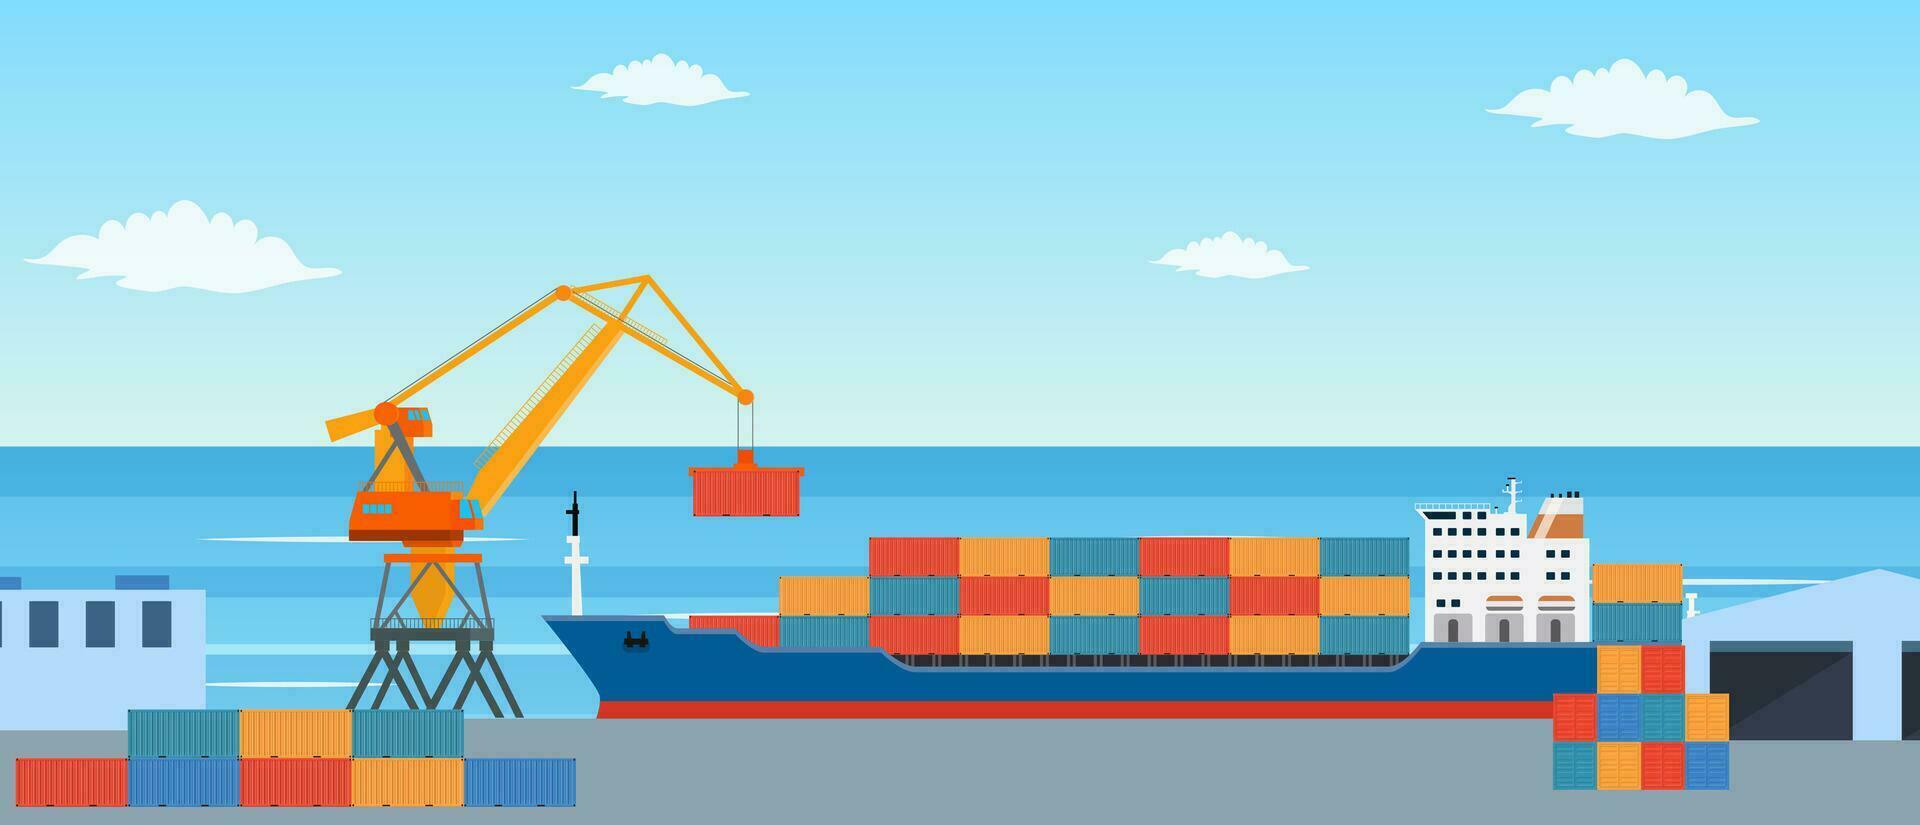 Cargo ship loading in city port. Cranes on dockside, pier unloading shipping containers from freight vessel to shore. Vector illustration in flat style